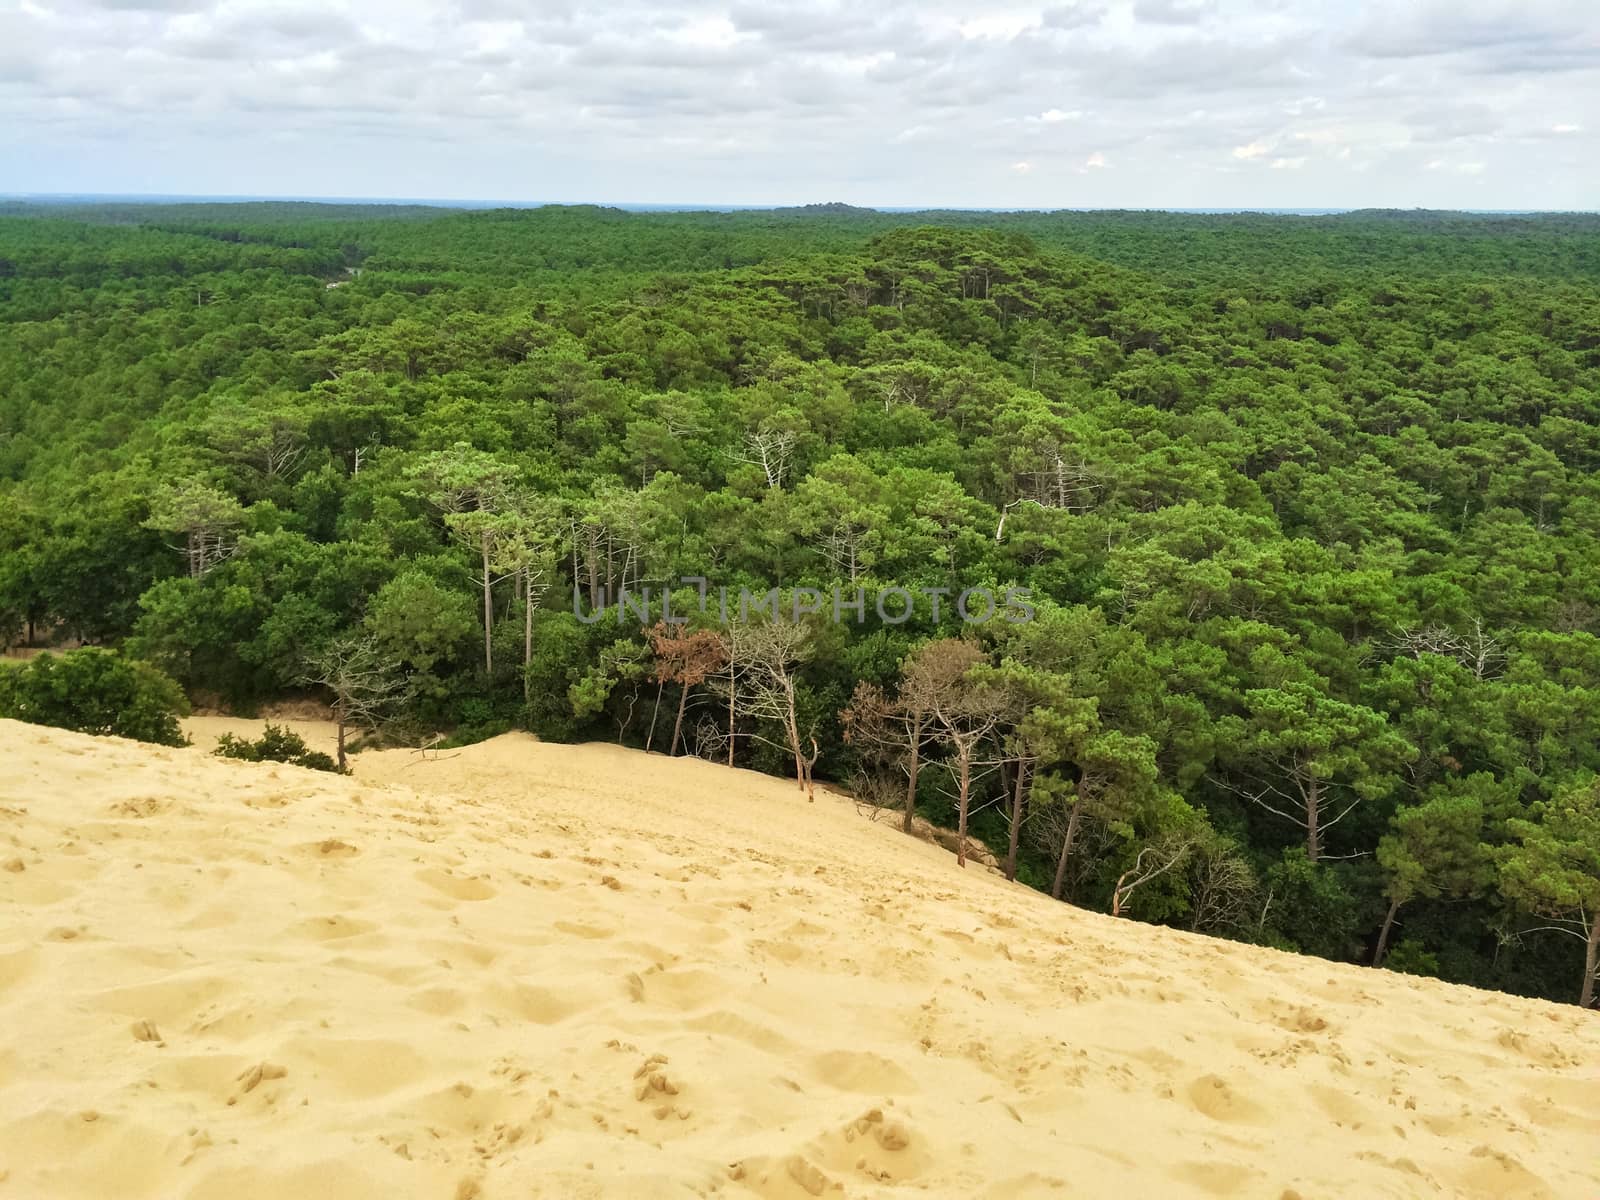 View from the top of Dune du Pilat, France by anikasalsera